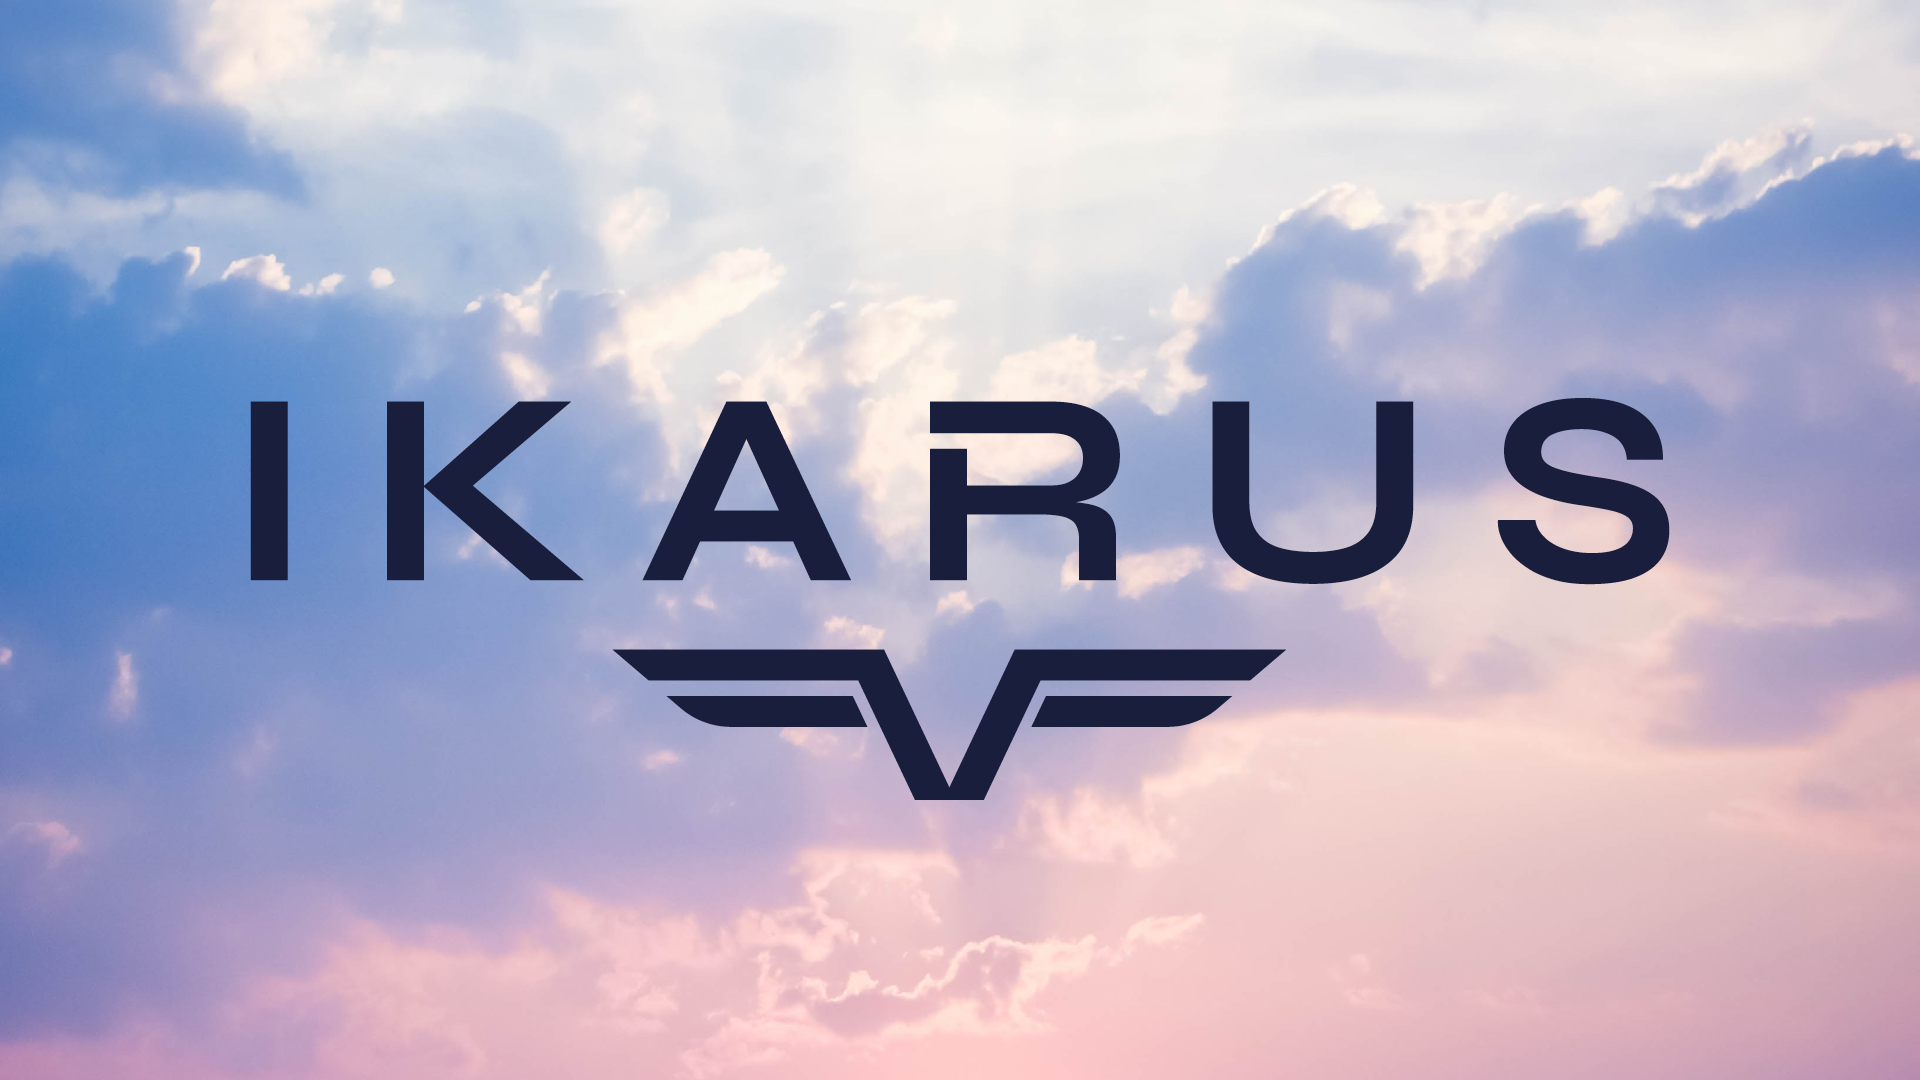 Ikarus to present new city bus at Busworld Europe (Magyarbusz.info)